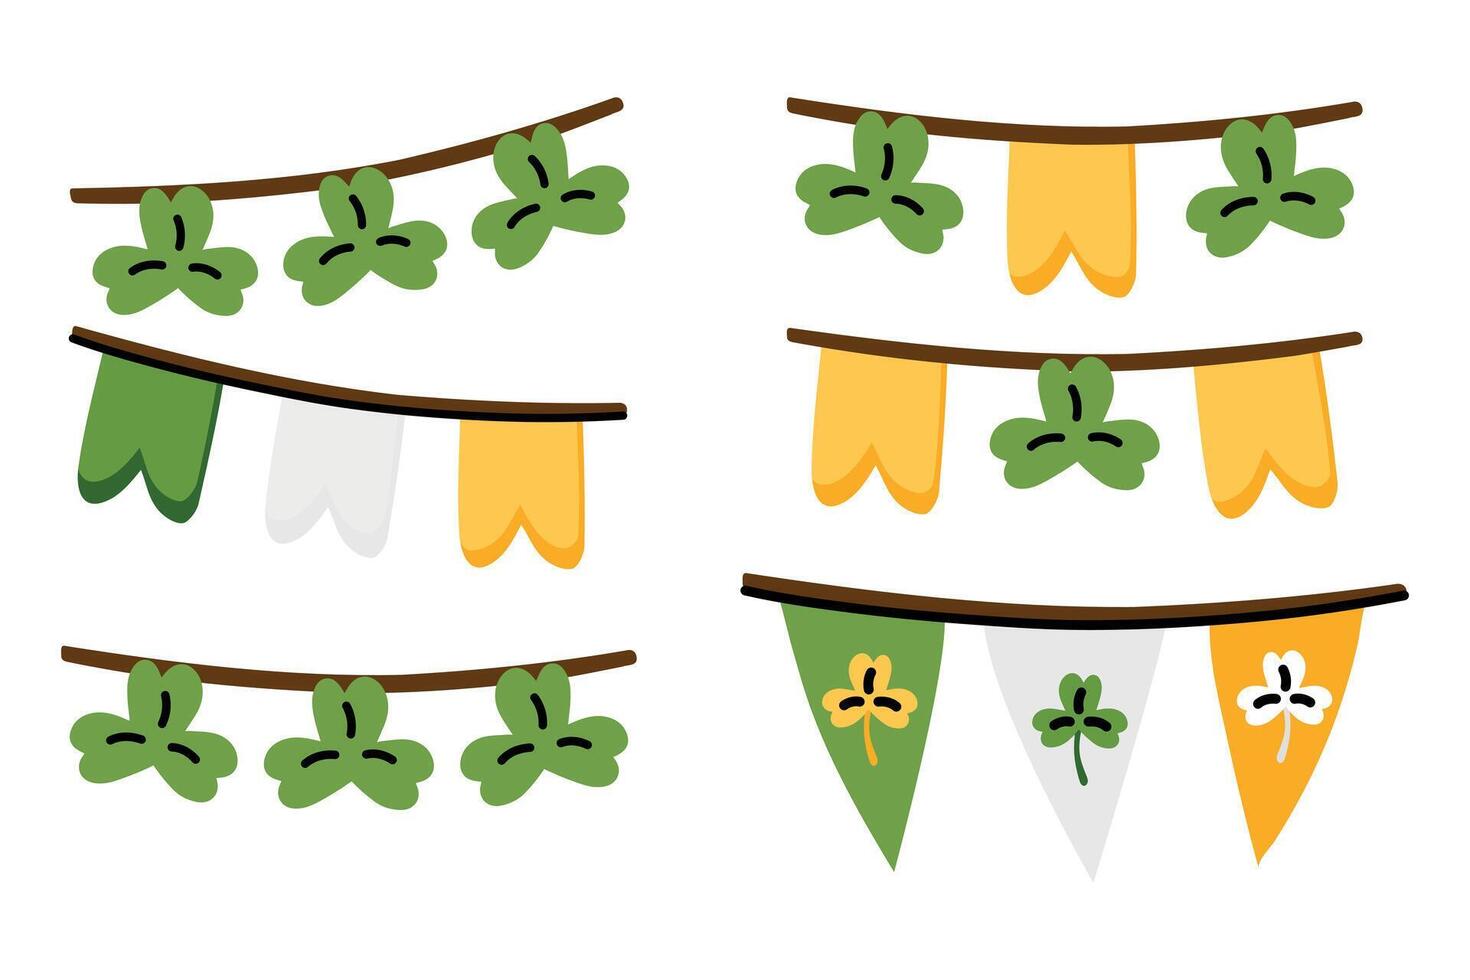 Flags at the St. Patrick's Day Festival vector